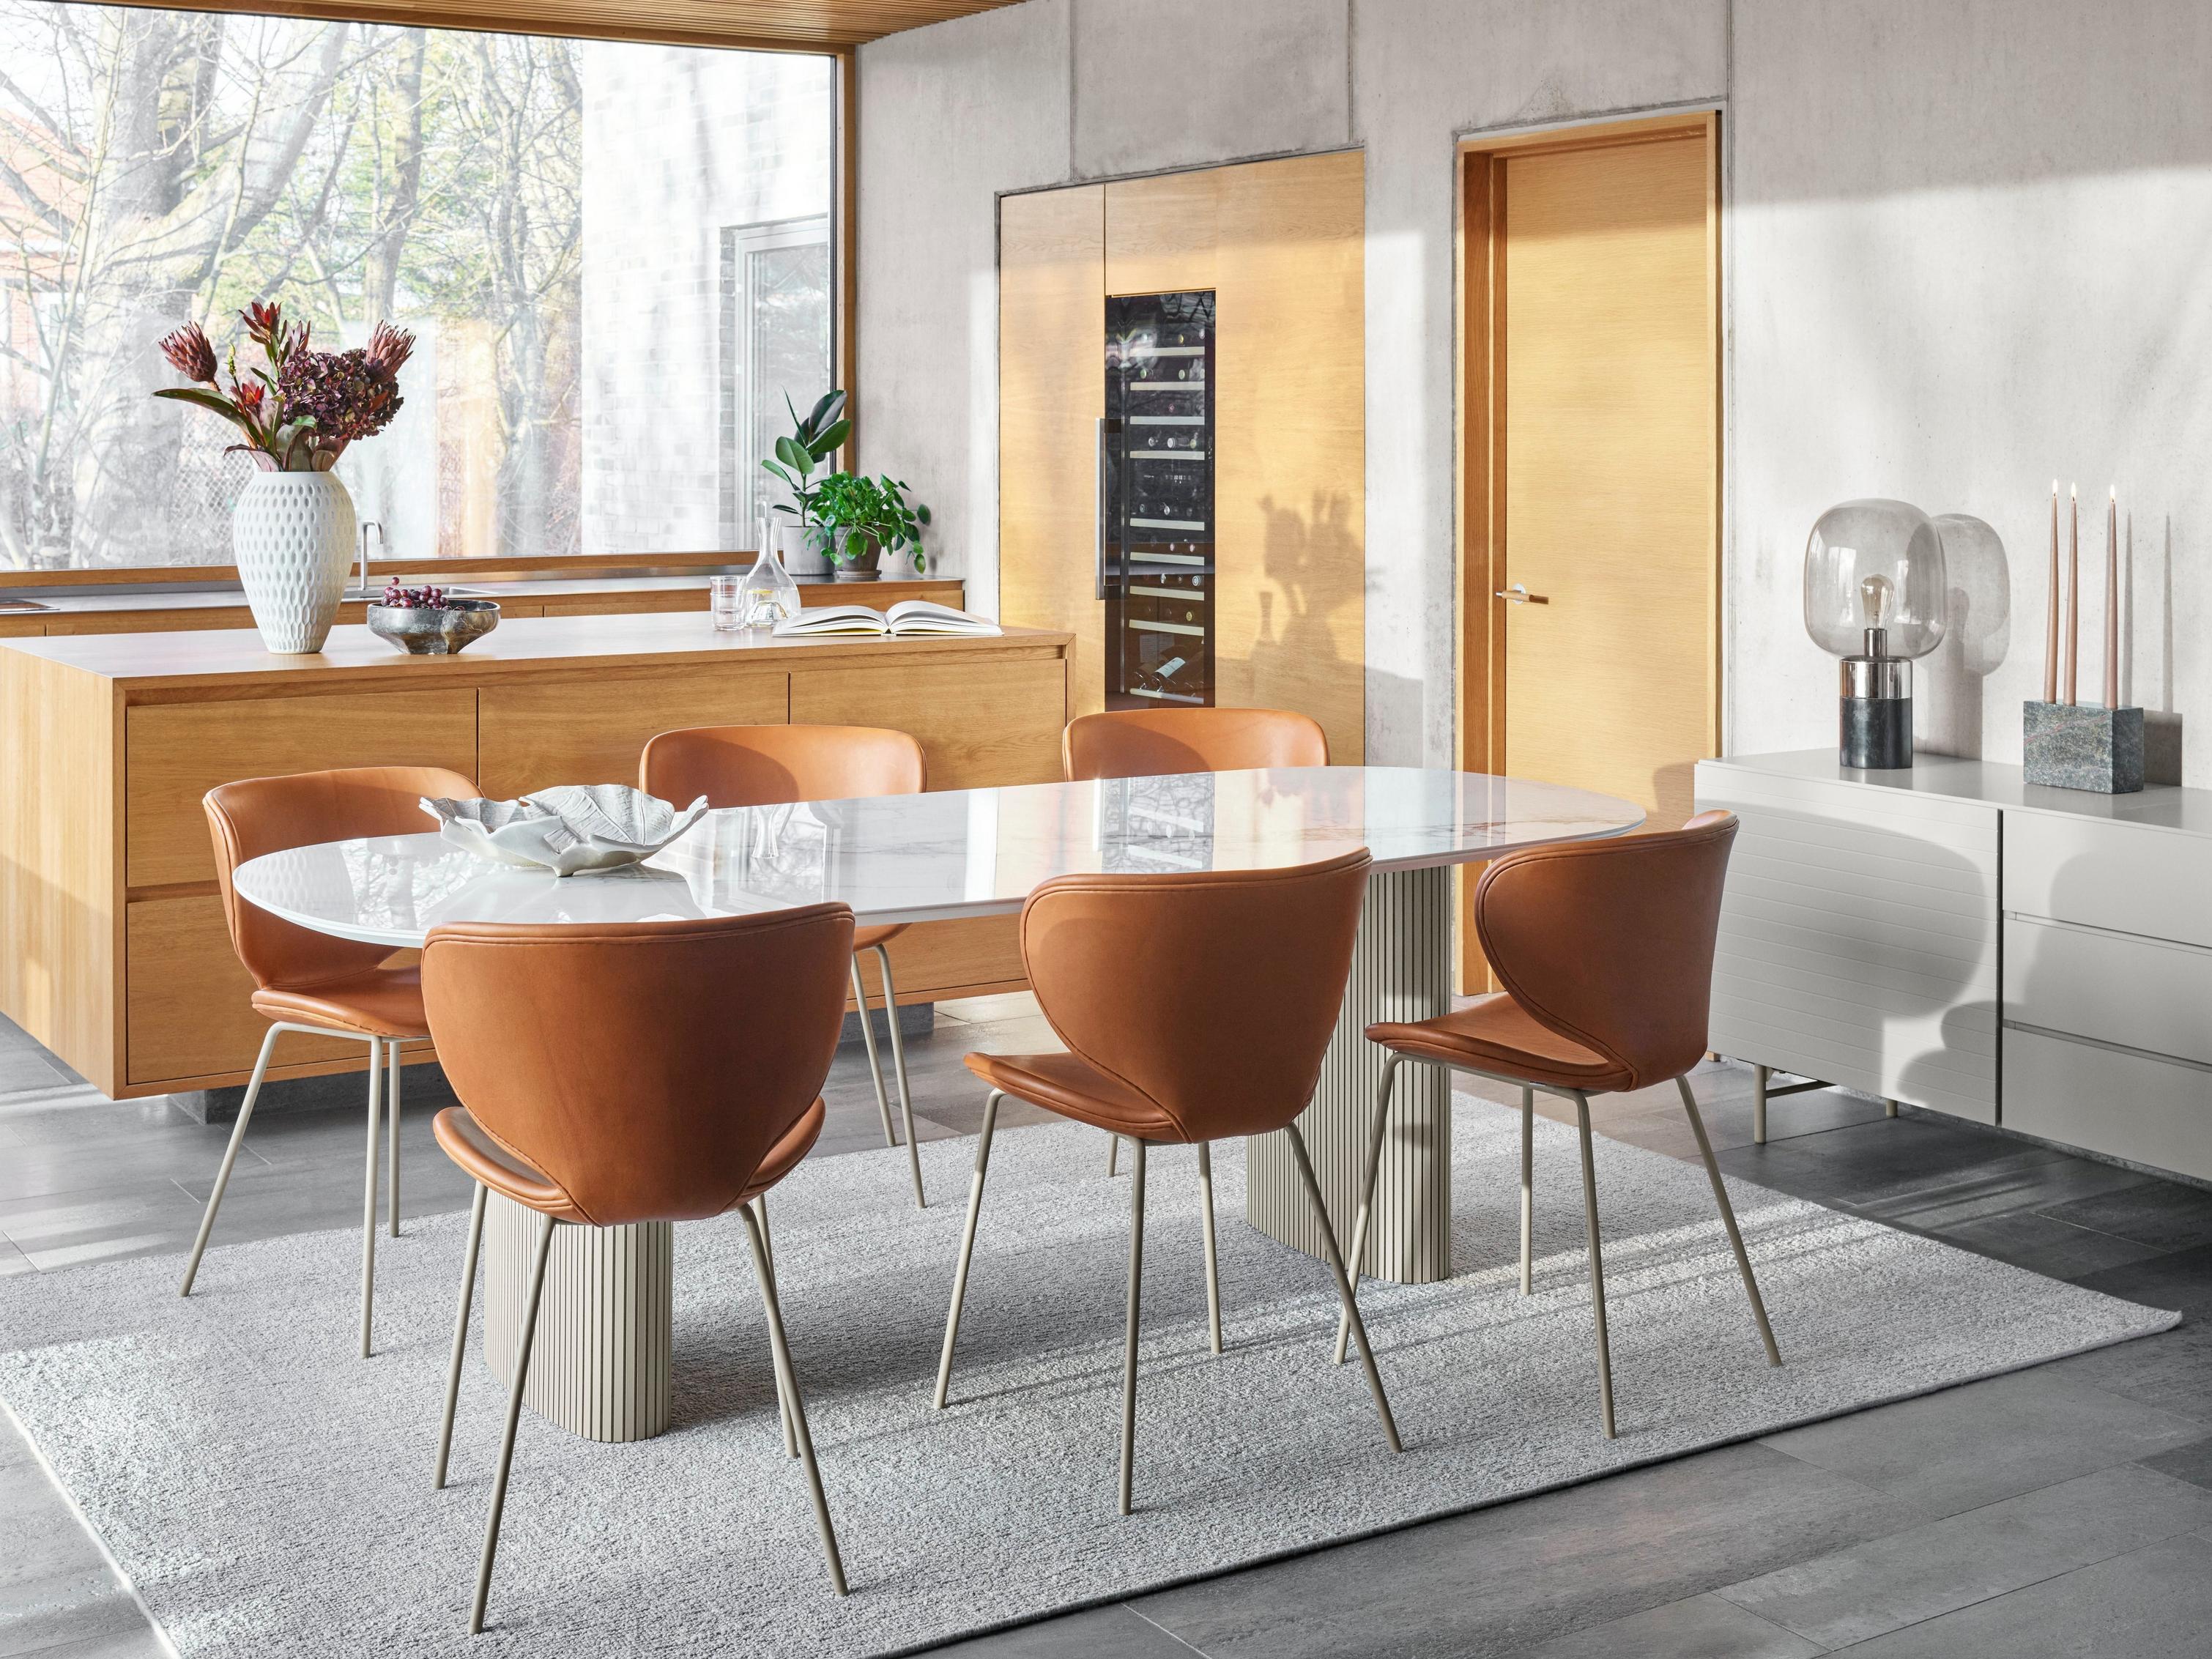 Warm, inviting dining room featuring the Santiago dining table